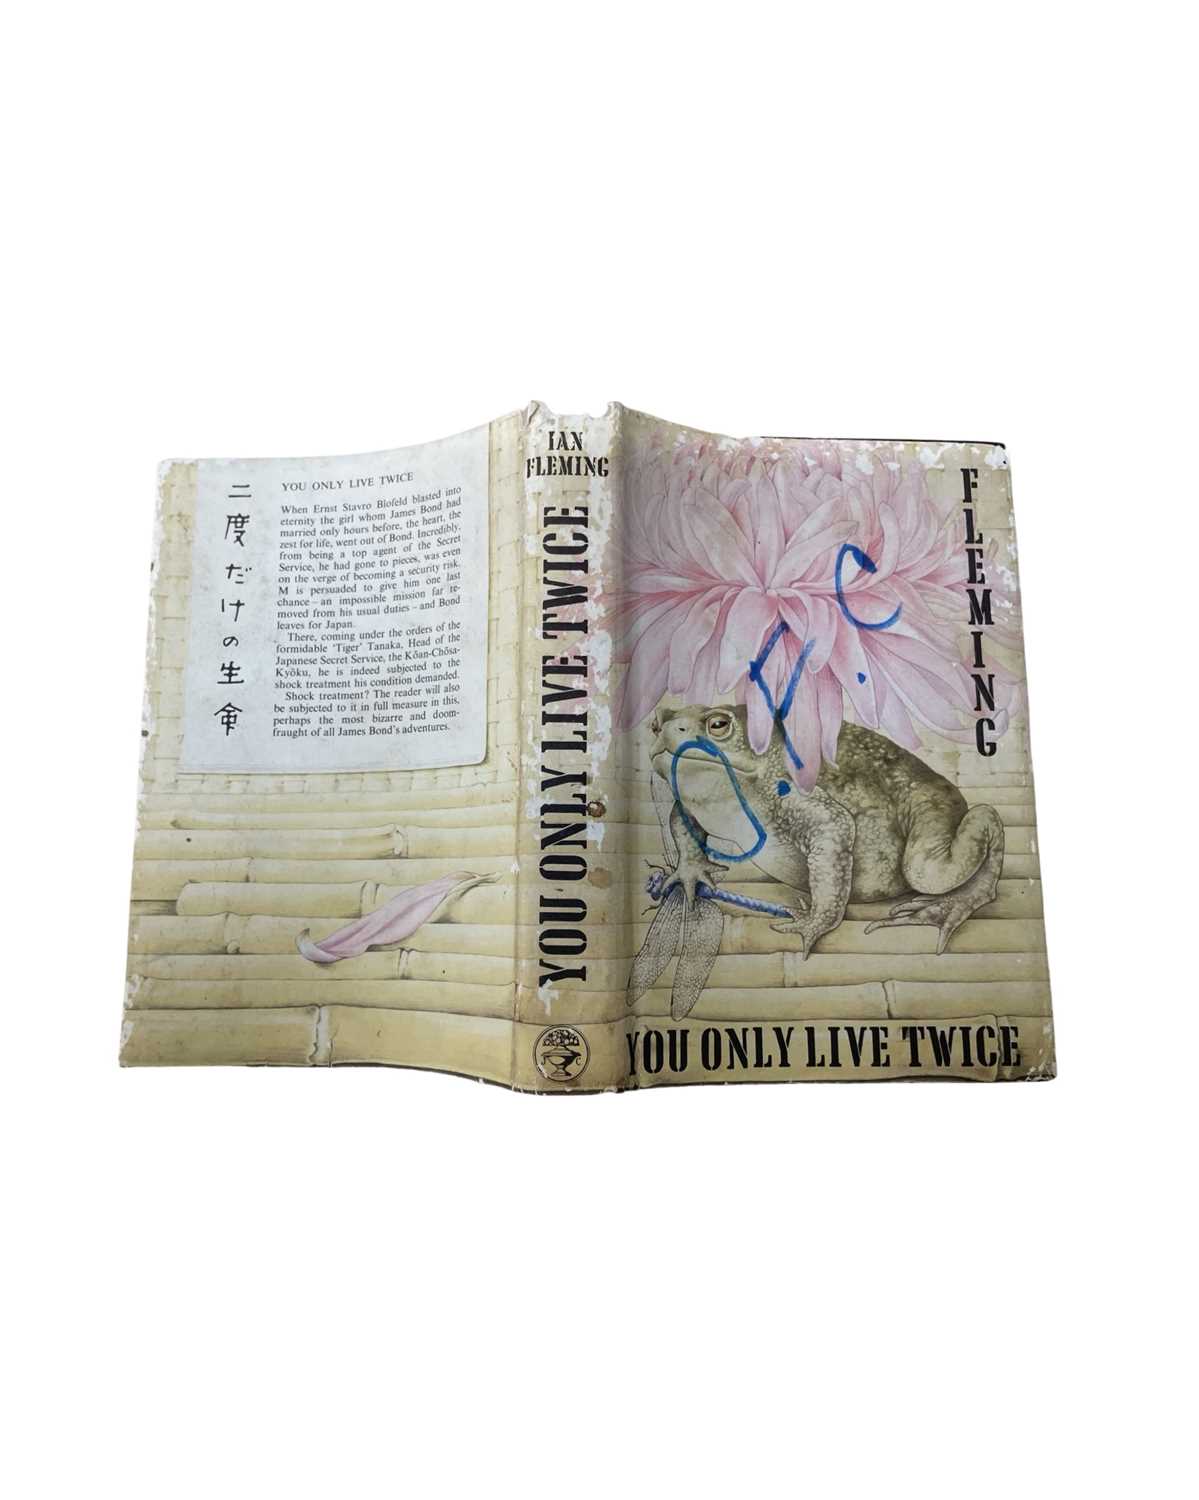 A first edition copy of James Bond: You Only Live Twice, IAN FLEMING. Jonathan Cape: 1964 Original - Image 4 of 6